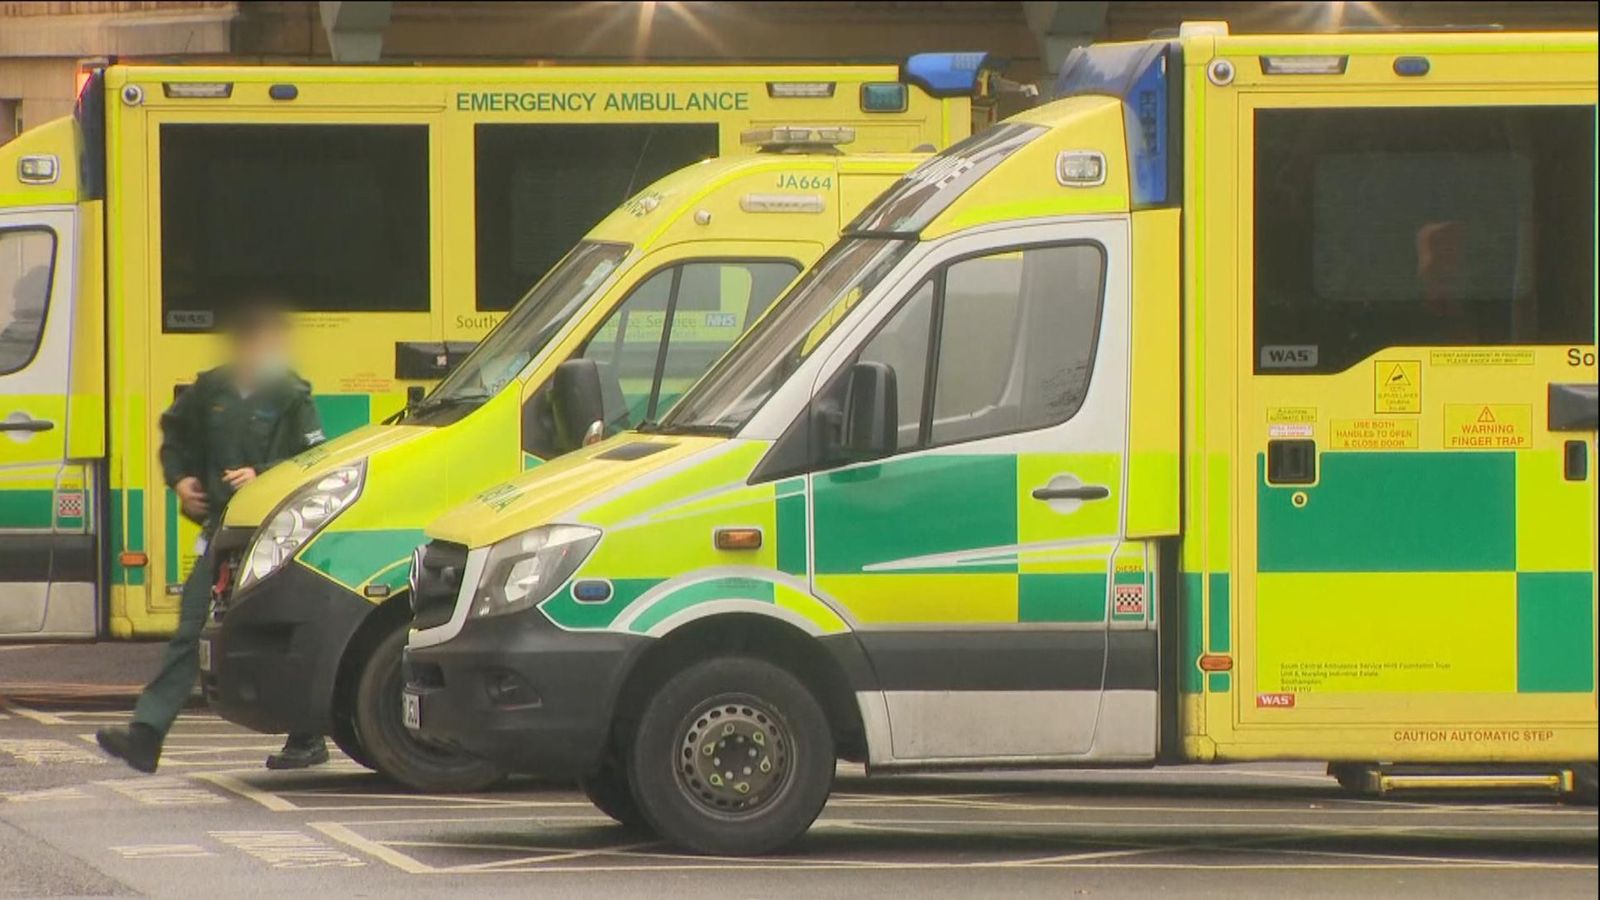 A&E waits: Hundreds of patients a week in England may have died unnecessarily